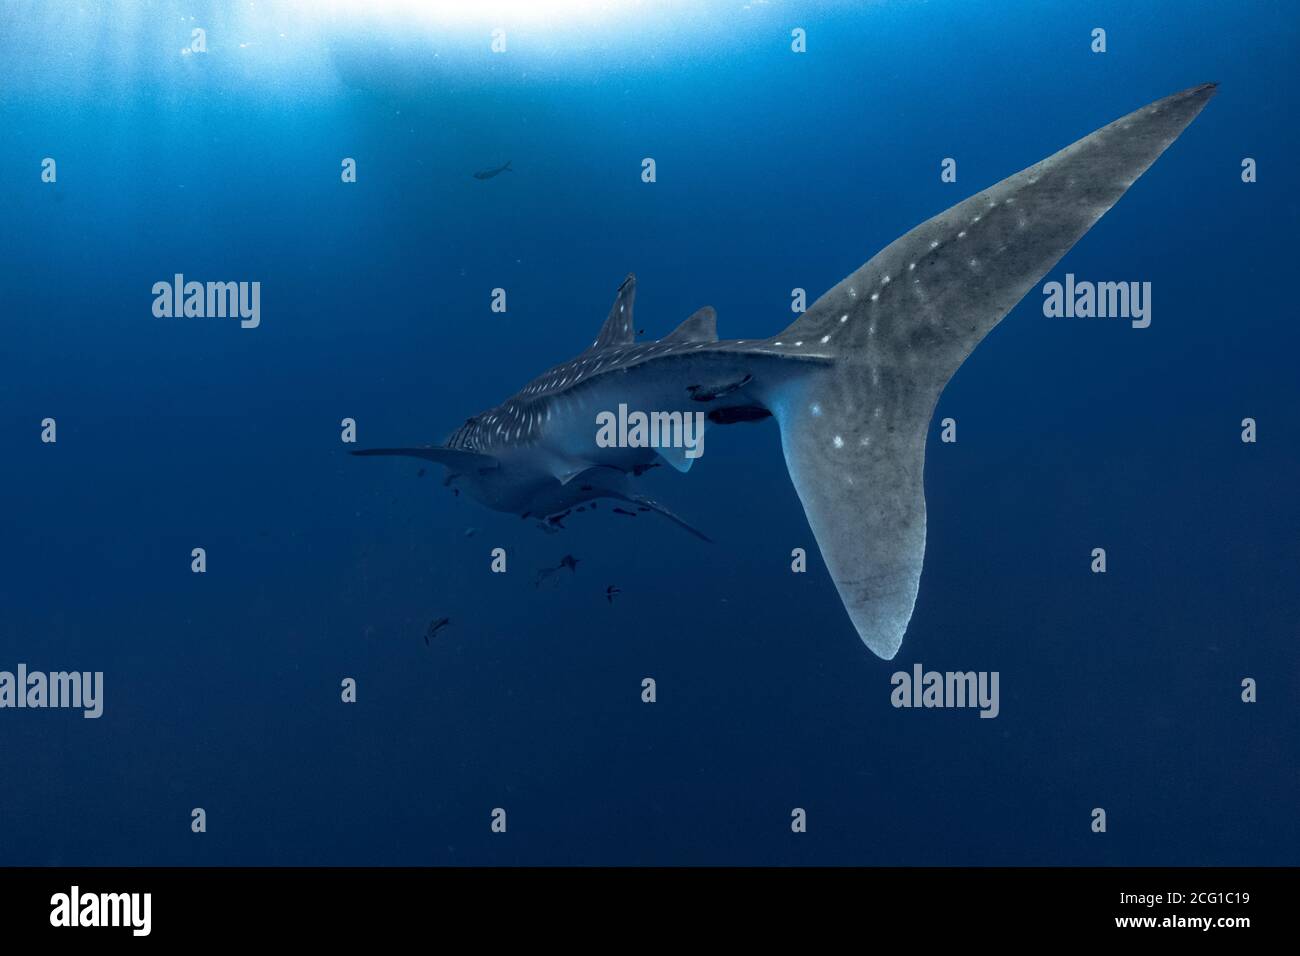 giant Whale shark swimming underwater with scuba divers Stock Photo